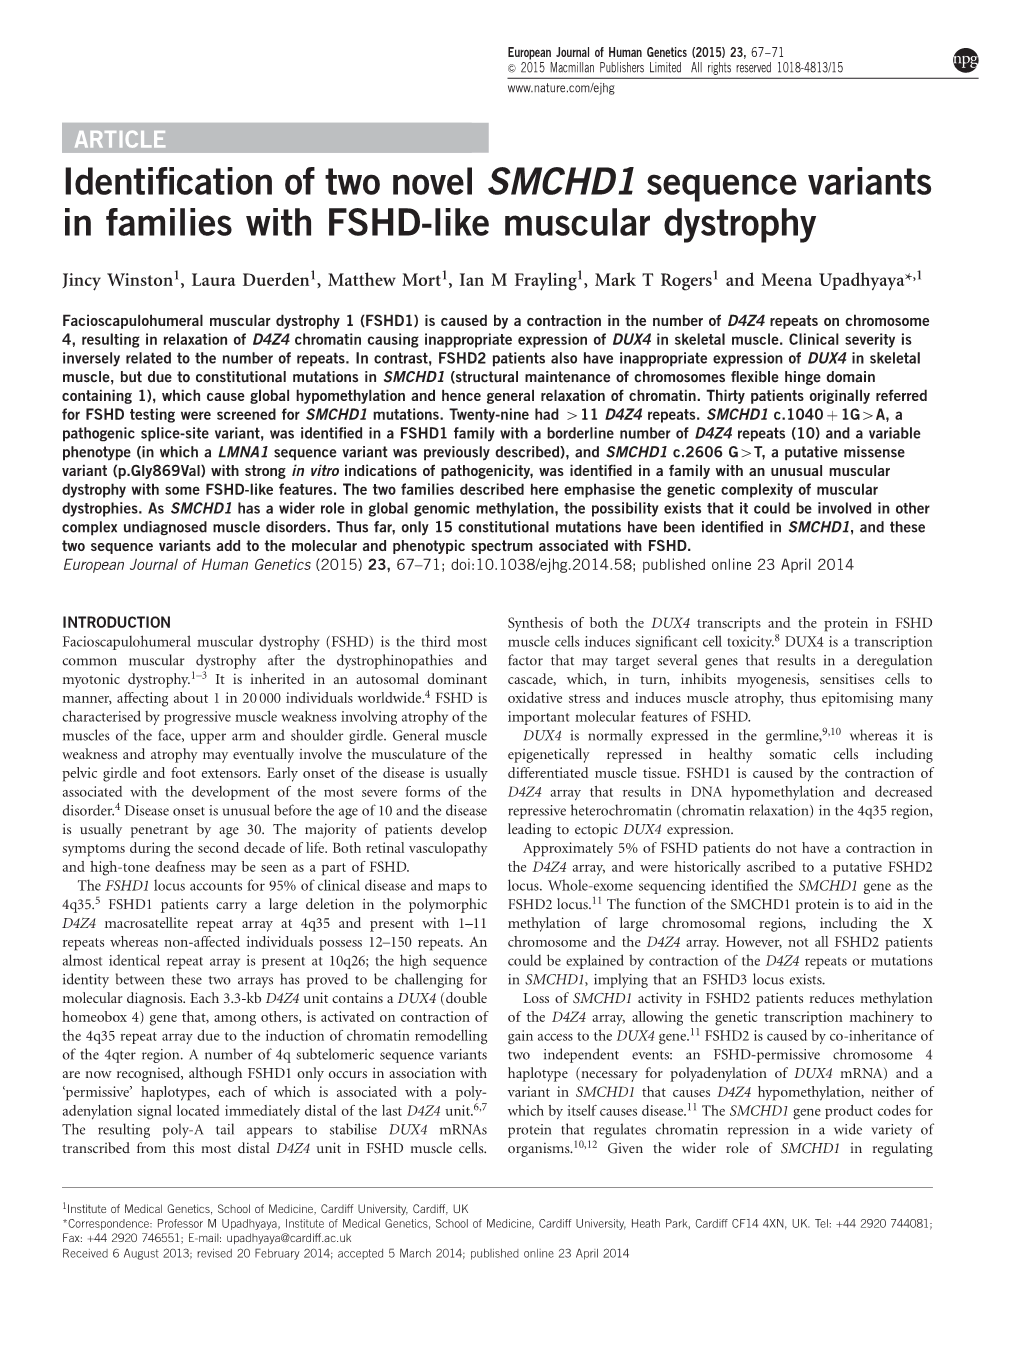 Identification of Two Novel SMCHD1 Sequence Variants in Families with FSHD-Like Muscular Dystrophy